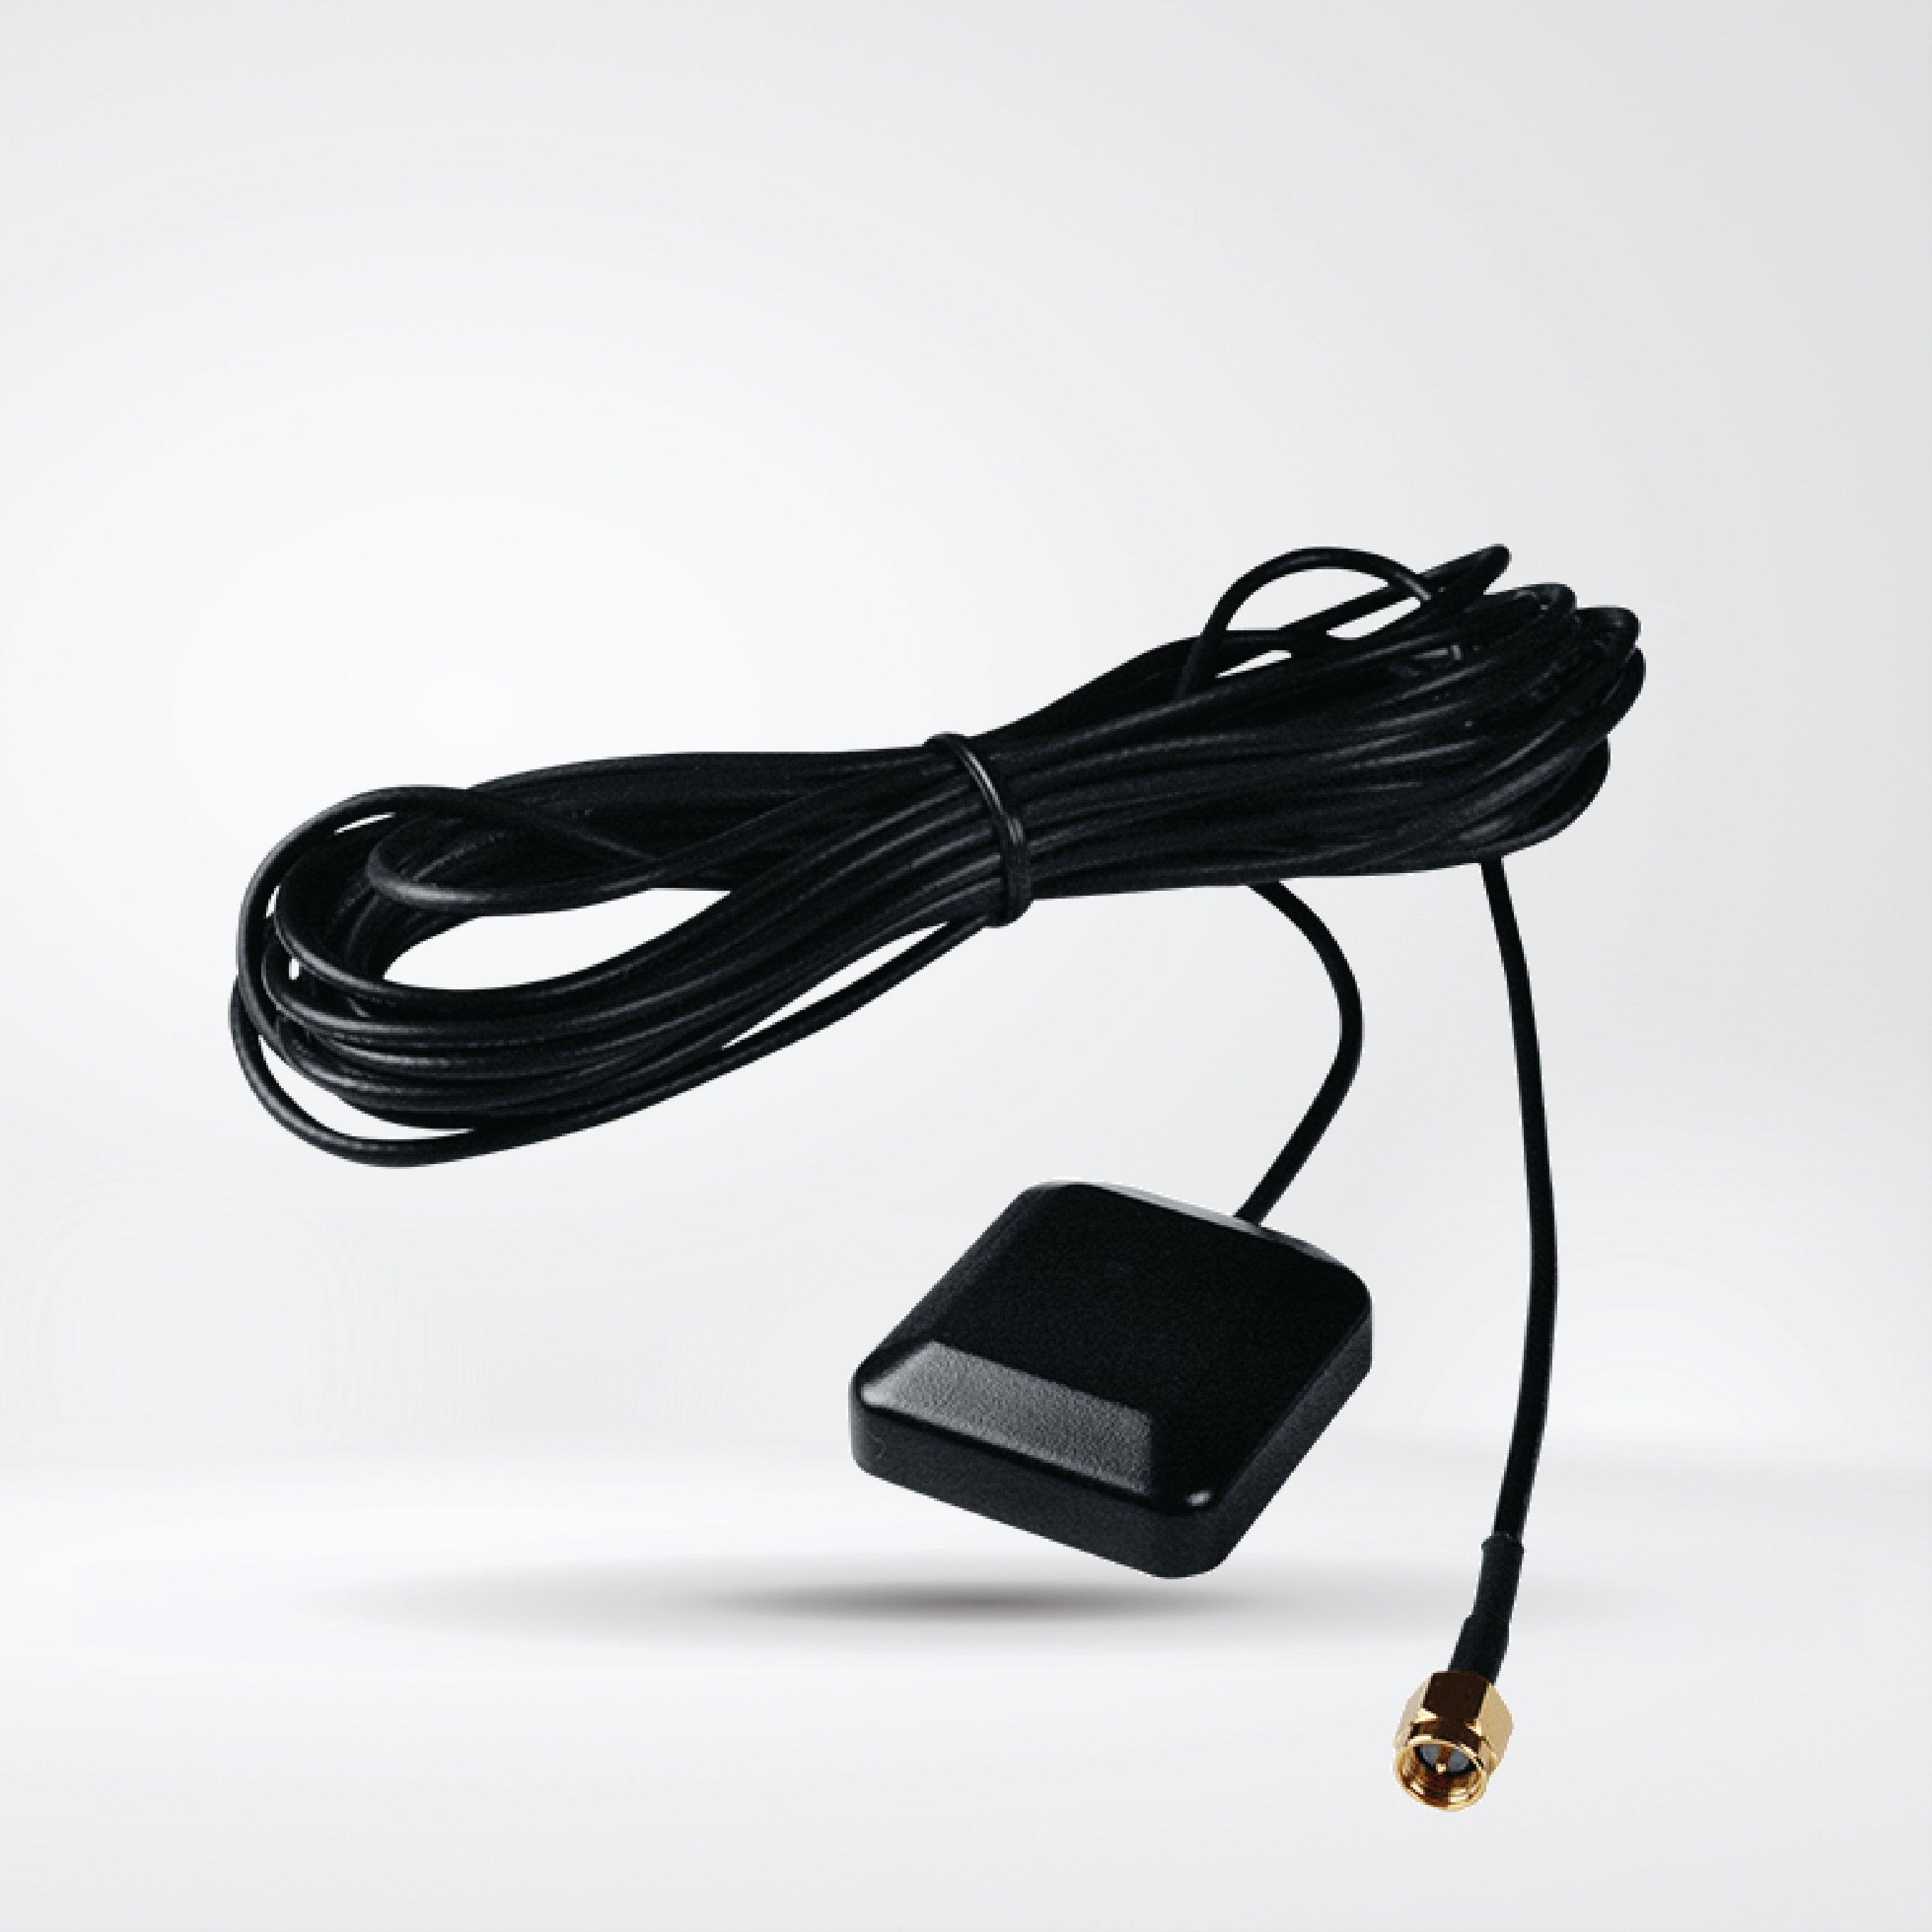 ANT-115-03 GPS magnetic mount antenna with 5M cable (SMA Male Plug) - Riverplus